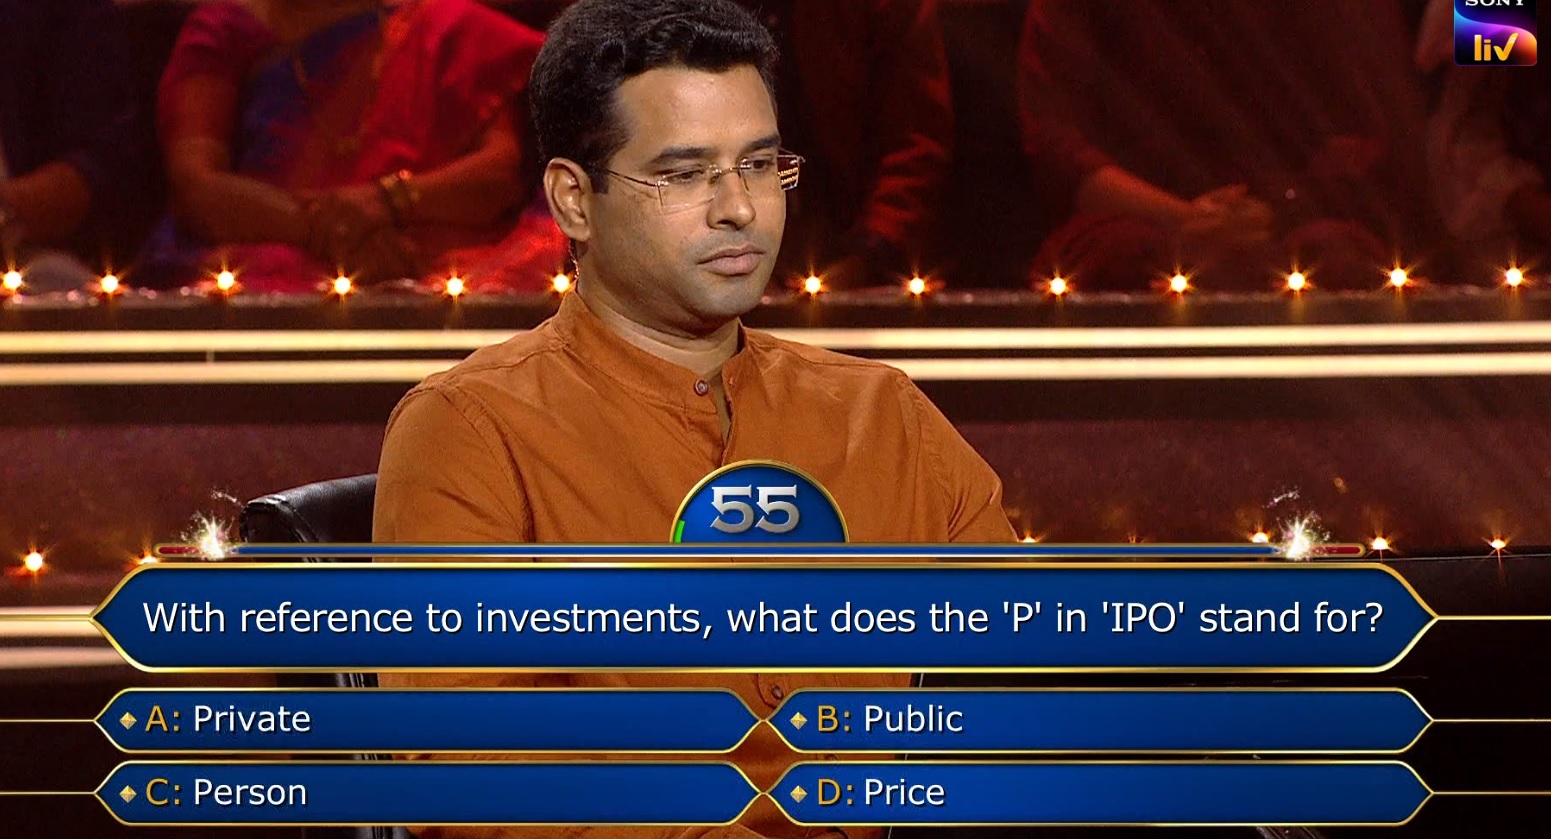 Ques : With reference to investments, what does the ‘P’ in ‘IPO’ stand for?